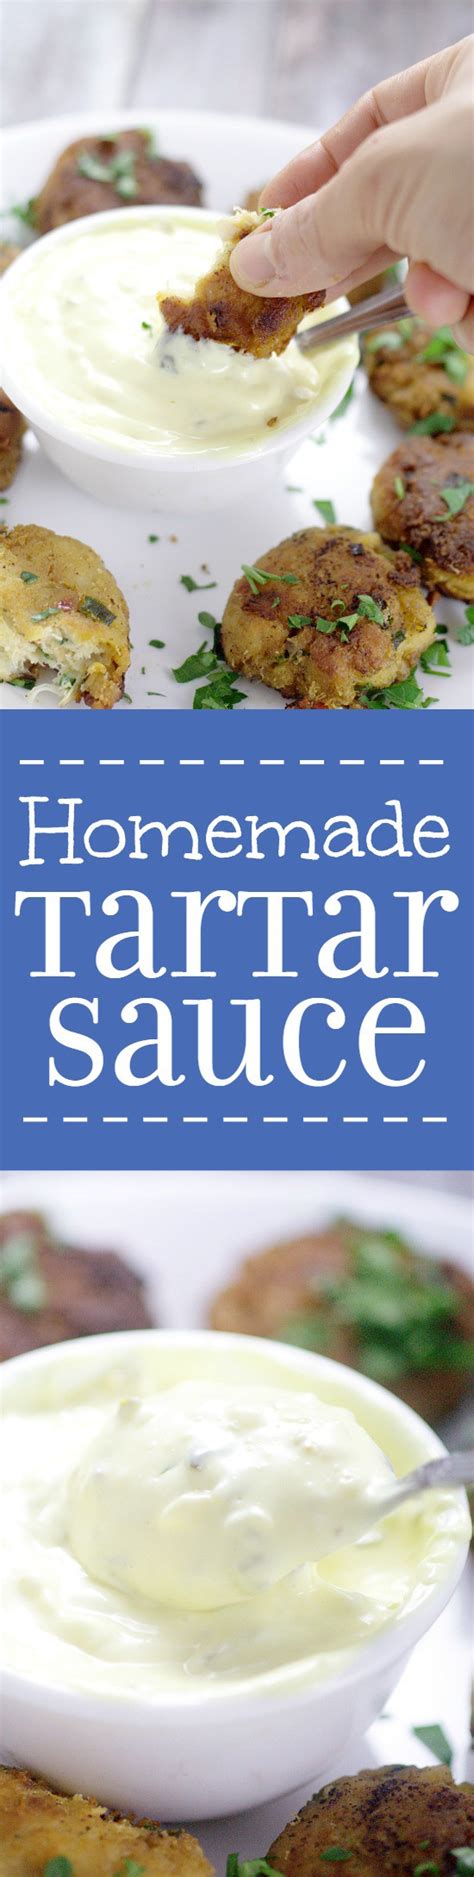 In a small bowl, mix together mayonnaise, sweet pickle relish, and minced onion. Homemade Tartar Sauce | The Gracious Wife